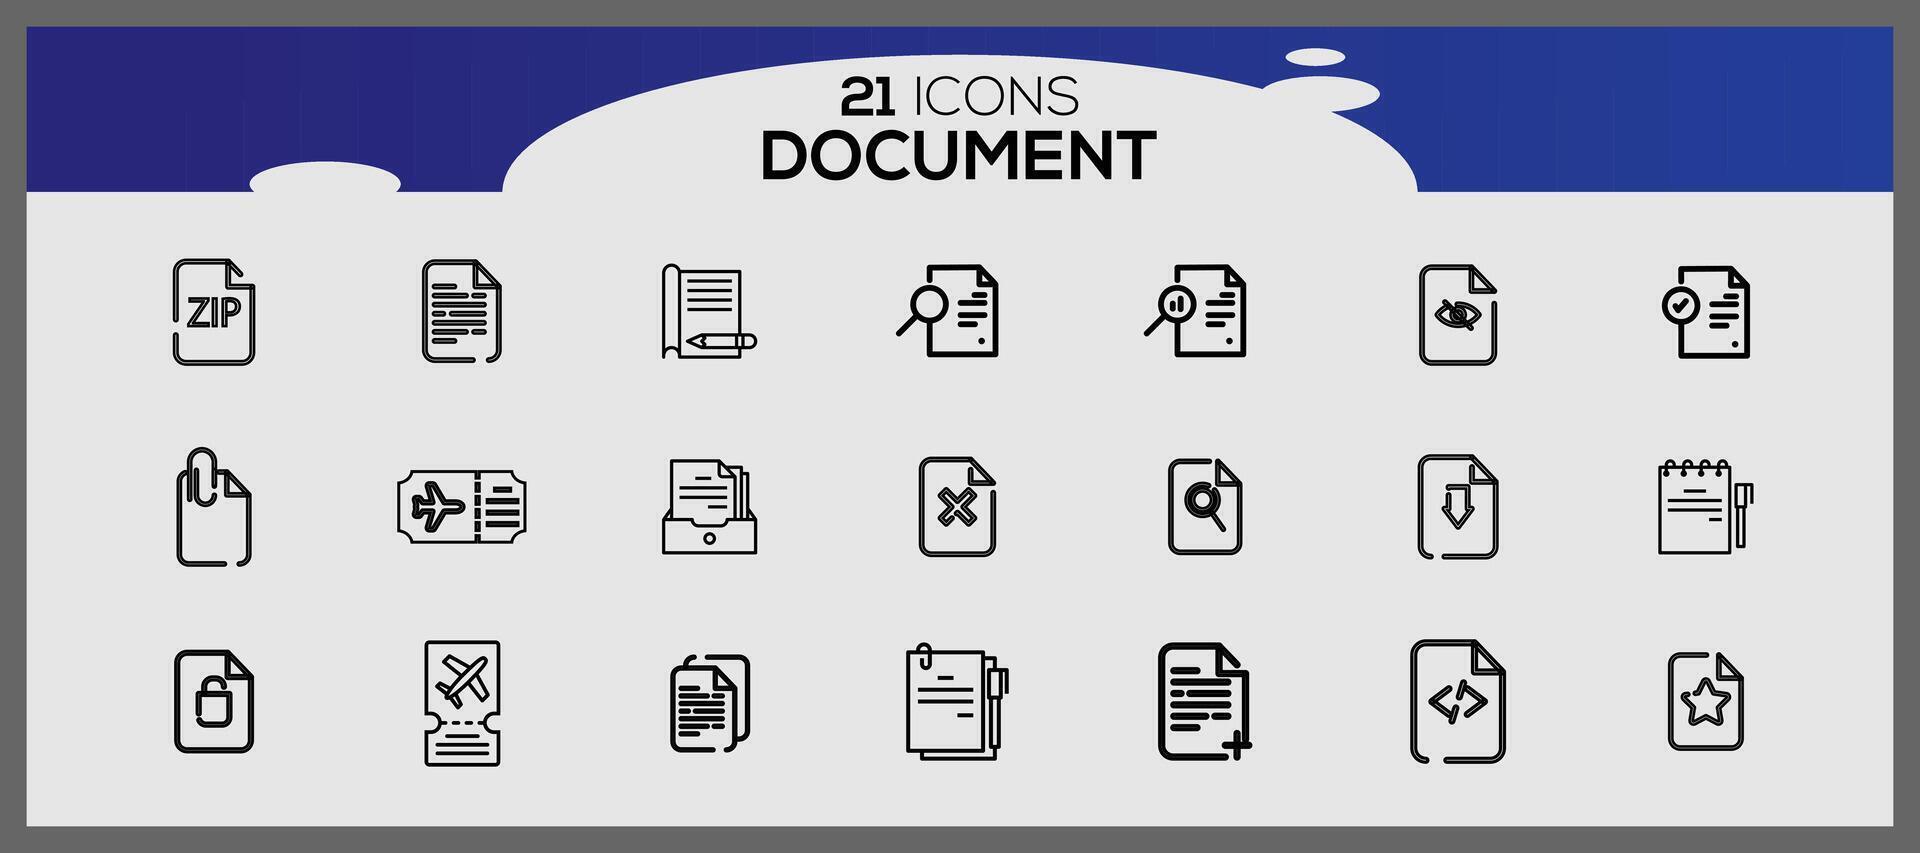 Creative files and documents flat icon pack. Website icons collection. Internet elements icons. vector